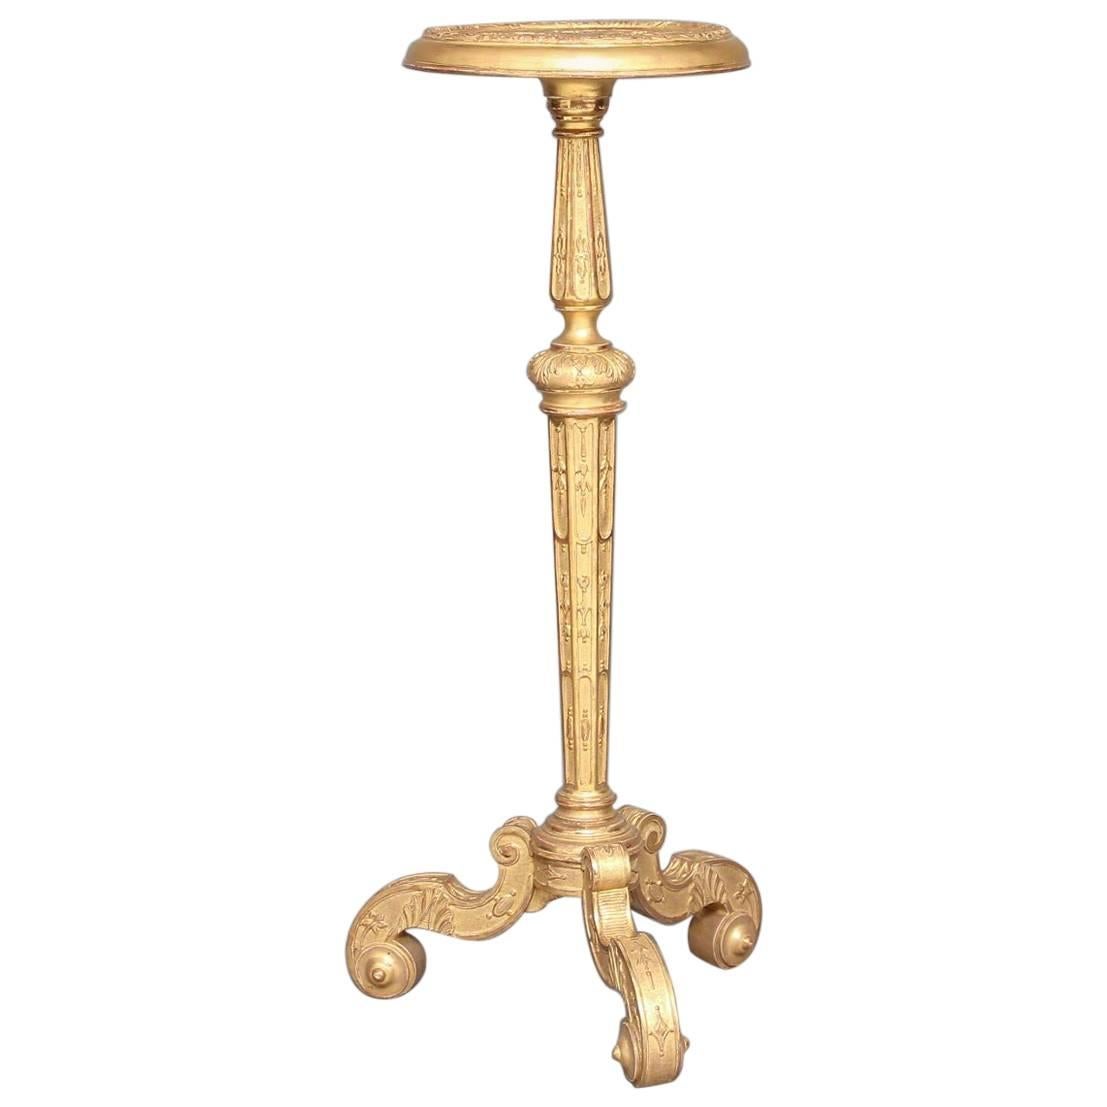 Early 19th Century Carved and Gilded Torcher